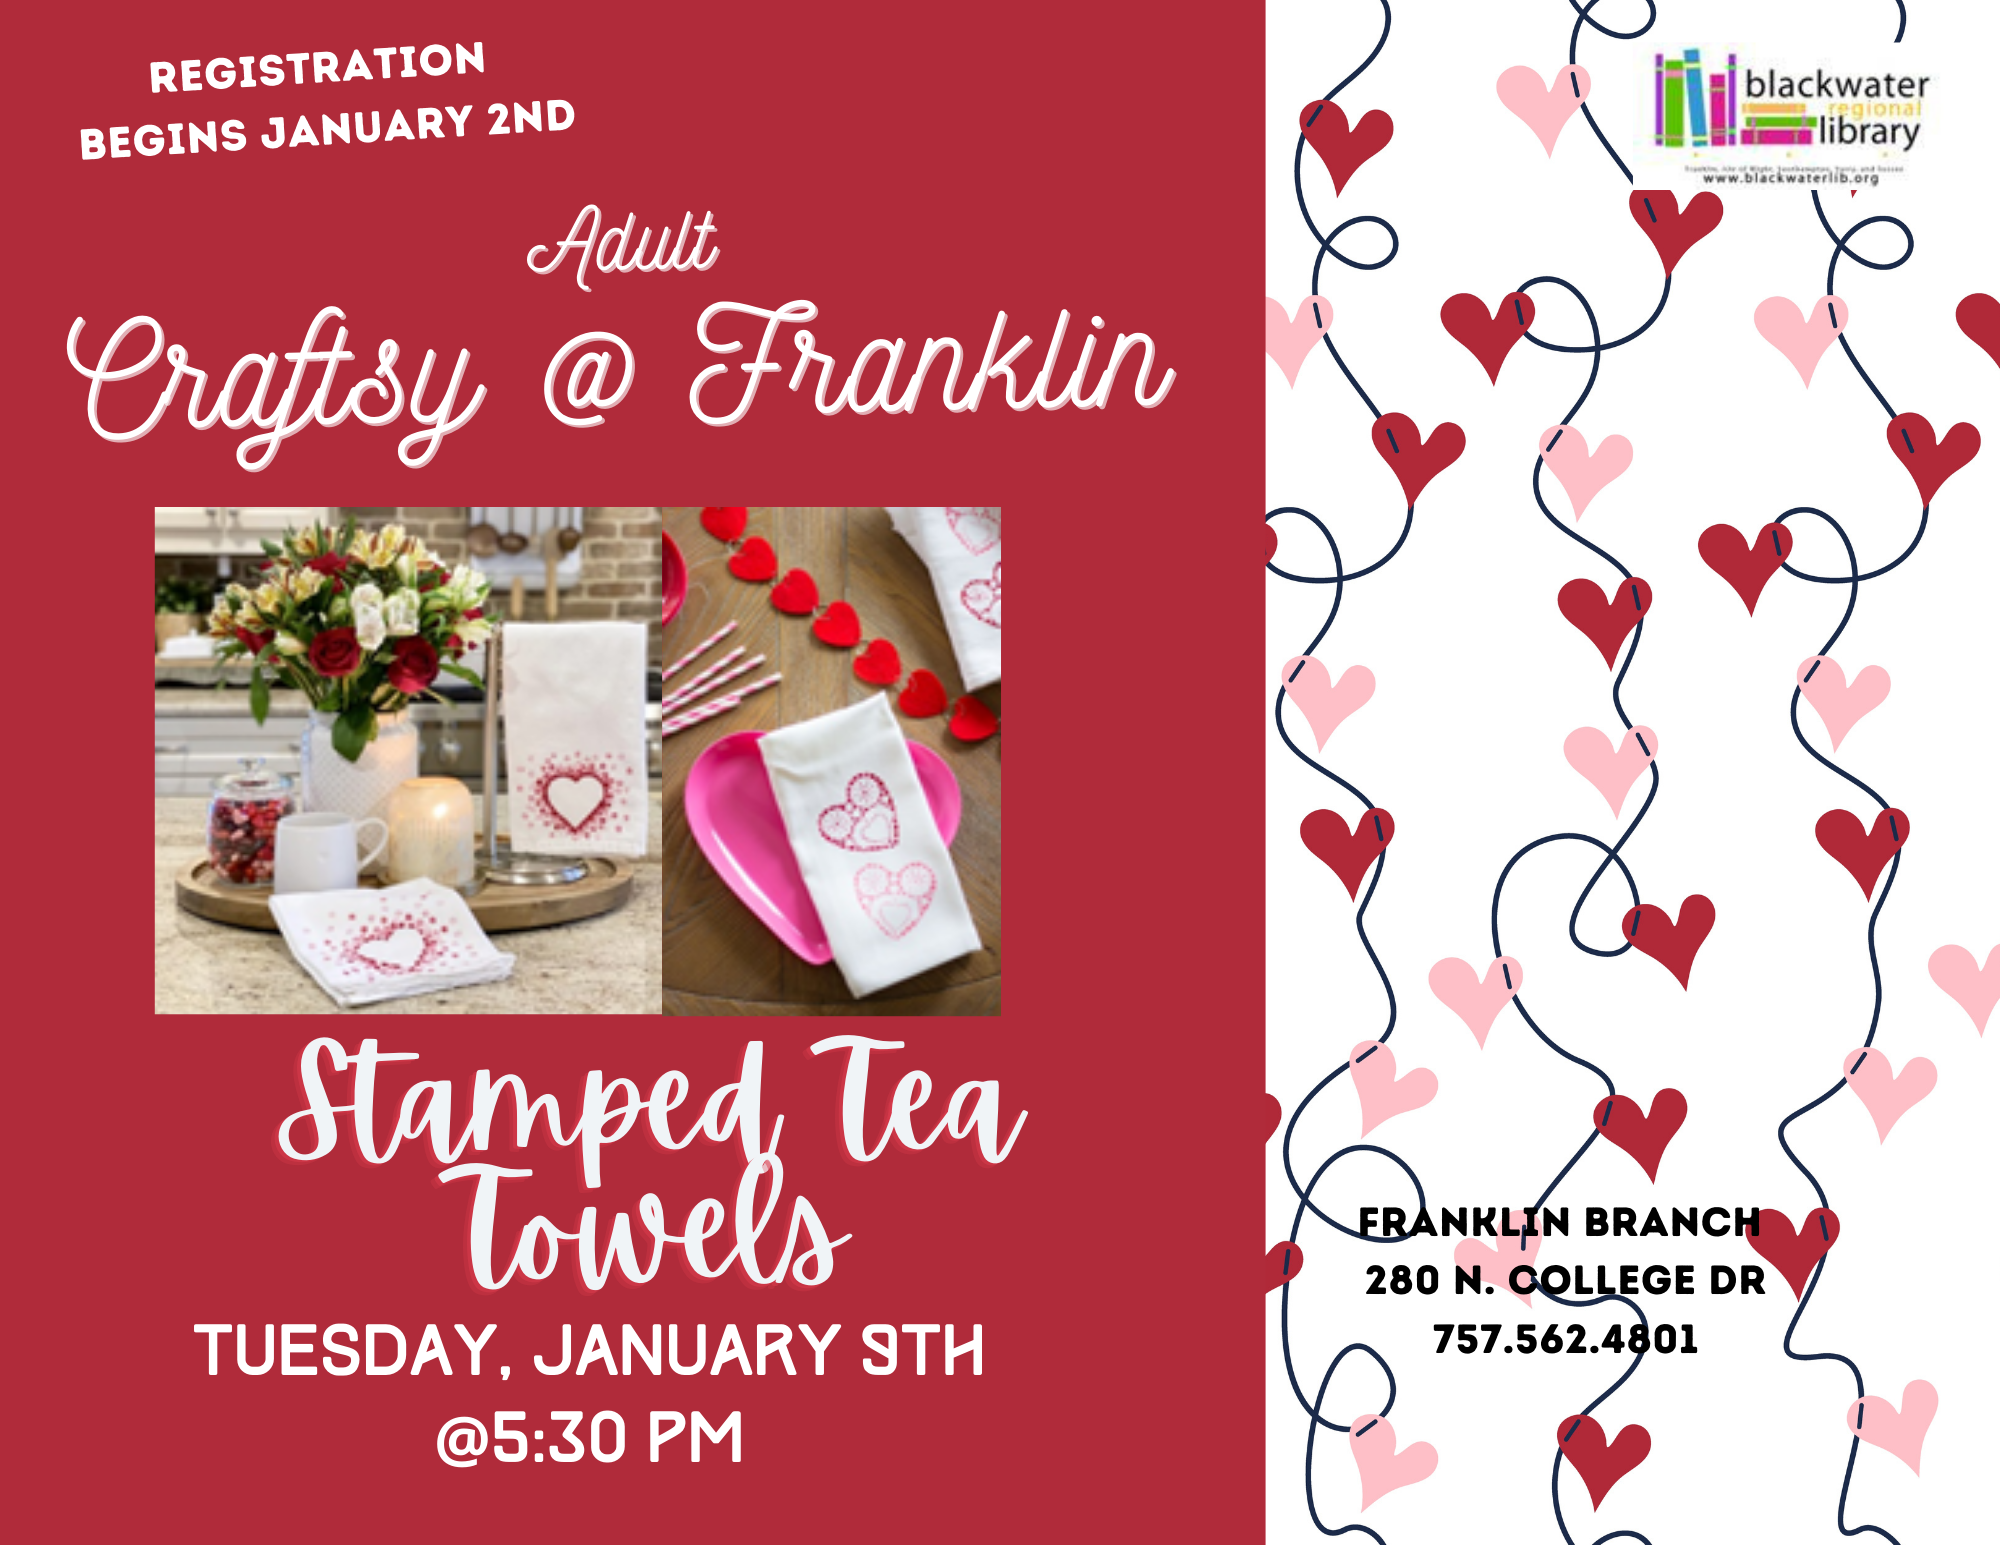 Craftsy participants will create stamped tea towels at January's program. Due to the potential for severe weather, this program has been moved to January 16, 2024.